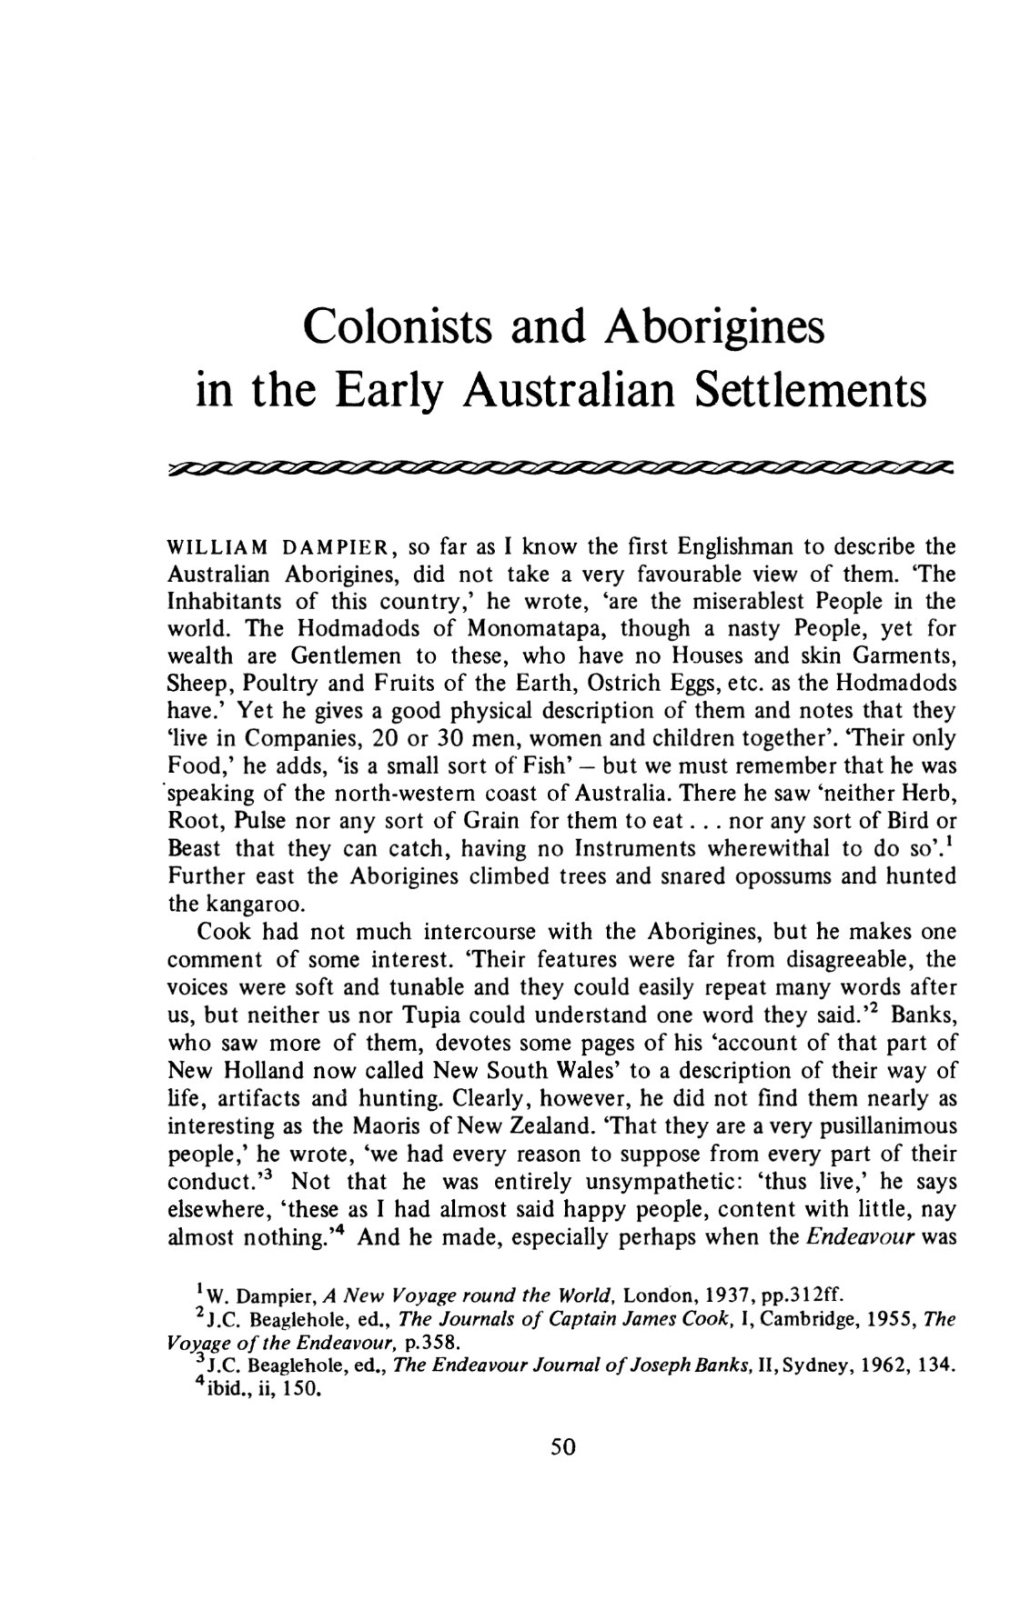 Colonists and Aborigines in the Early Australian Settlements